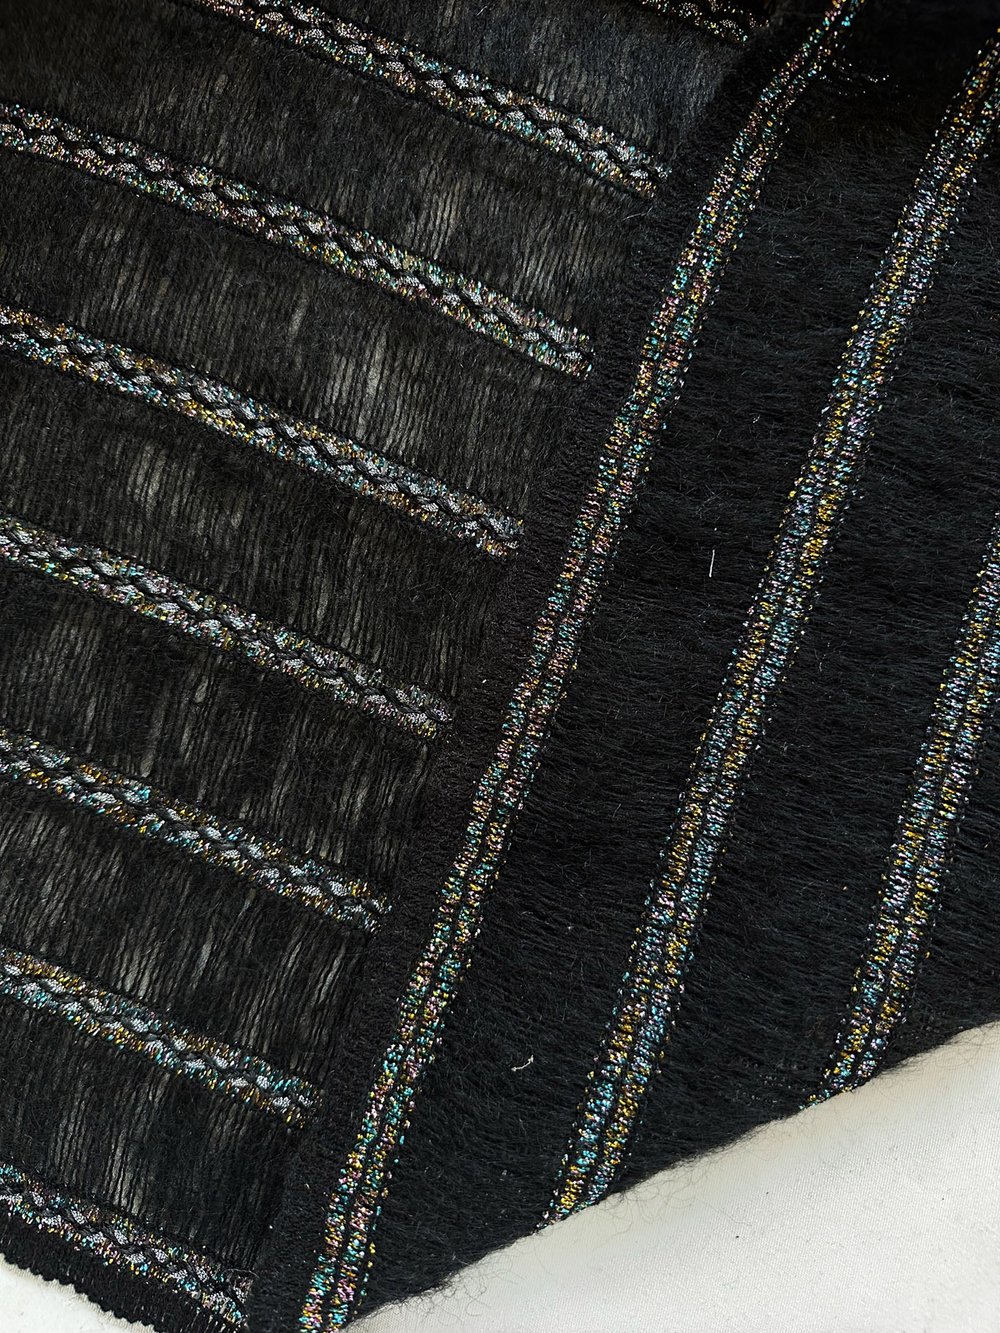 Beaded Trim: Embroidered Exclusive Trimmings from France by Riechers  Marescot, SKU 00043969 at $793 — Buy Luxury Fabrics Online